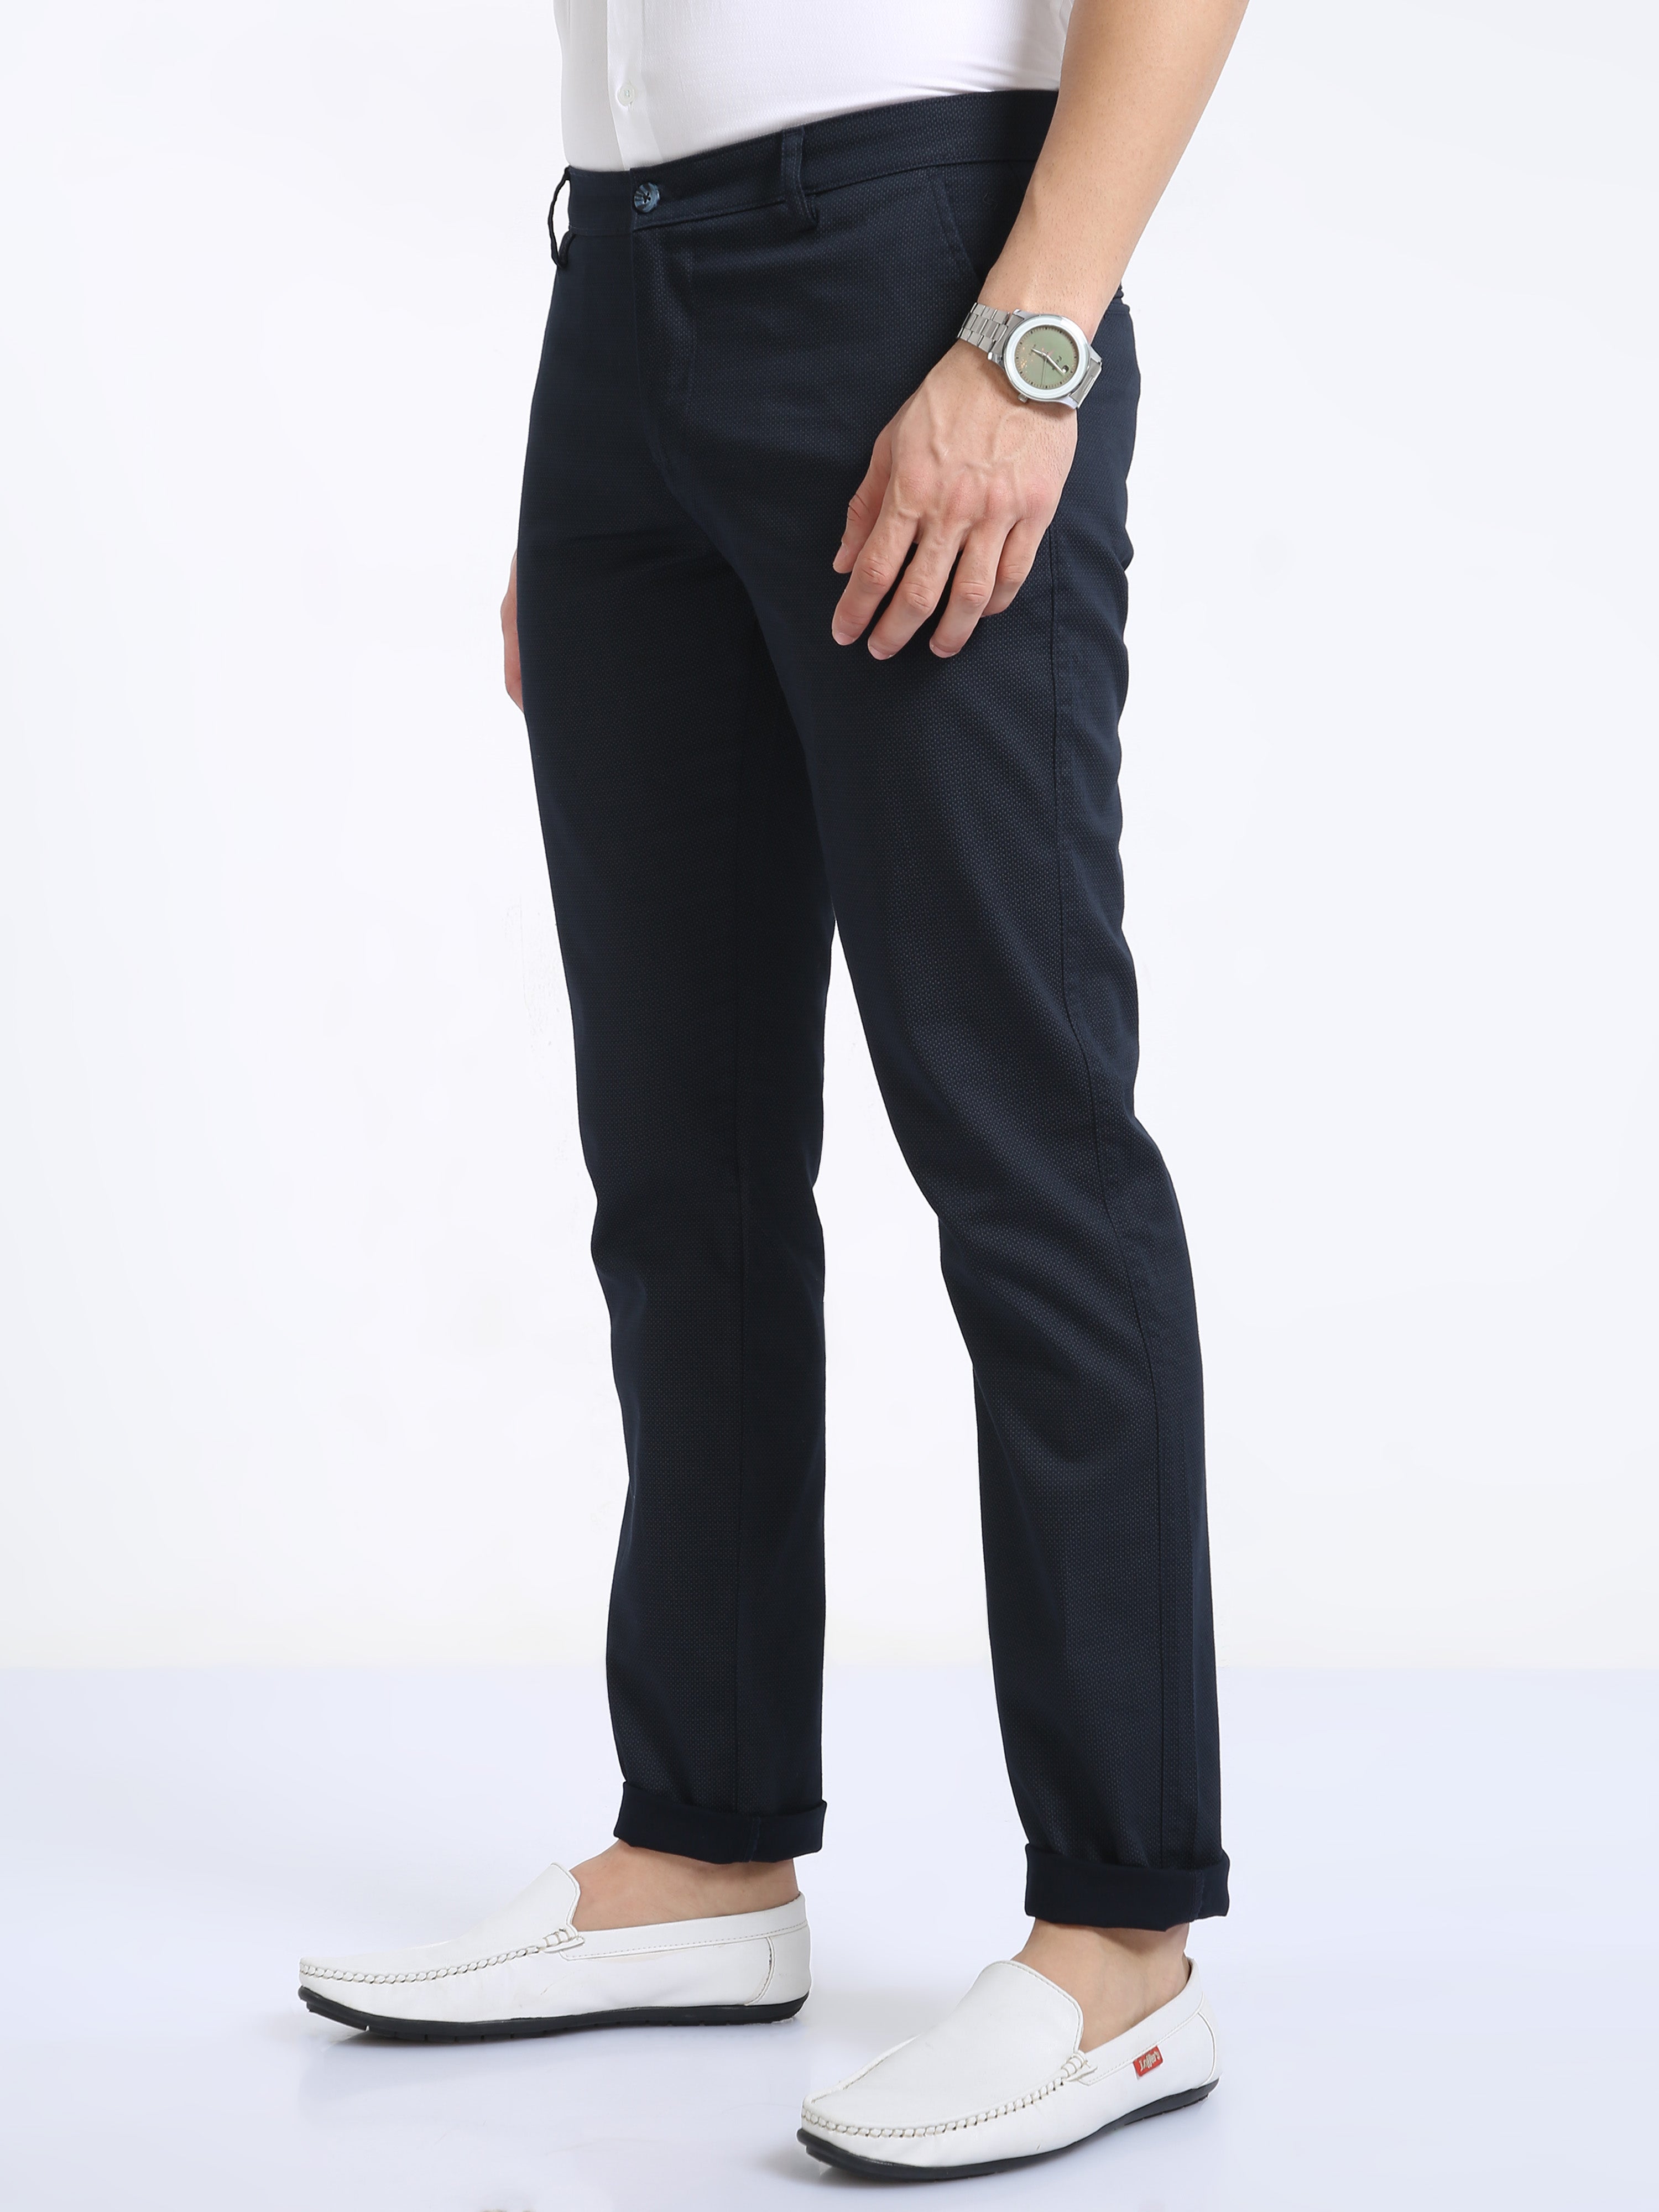 Classic Polo Mens Moderate Fit Dotted Navy Color Trousers | To2-01 B-Nvy-Mf-Ly